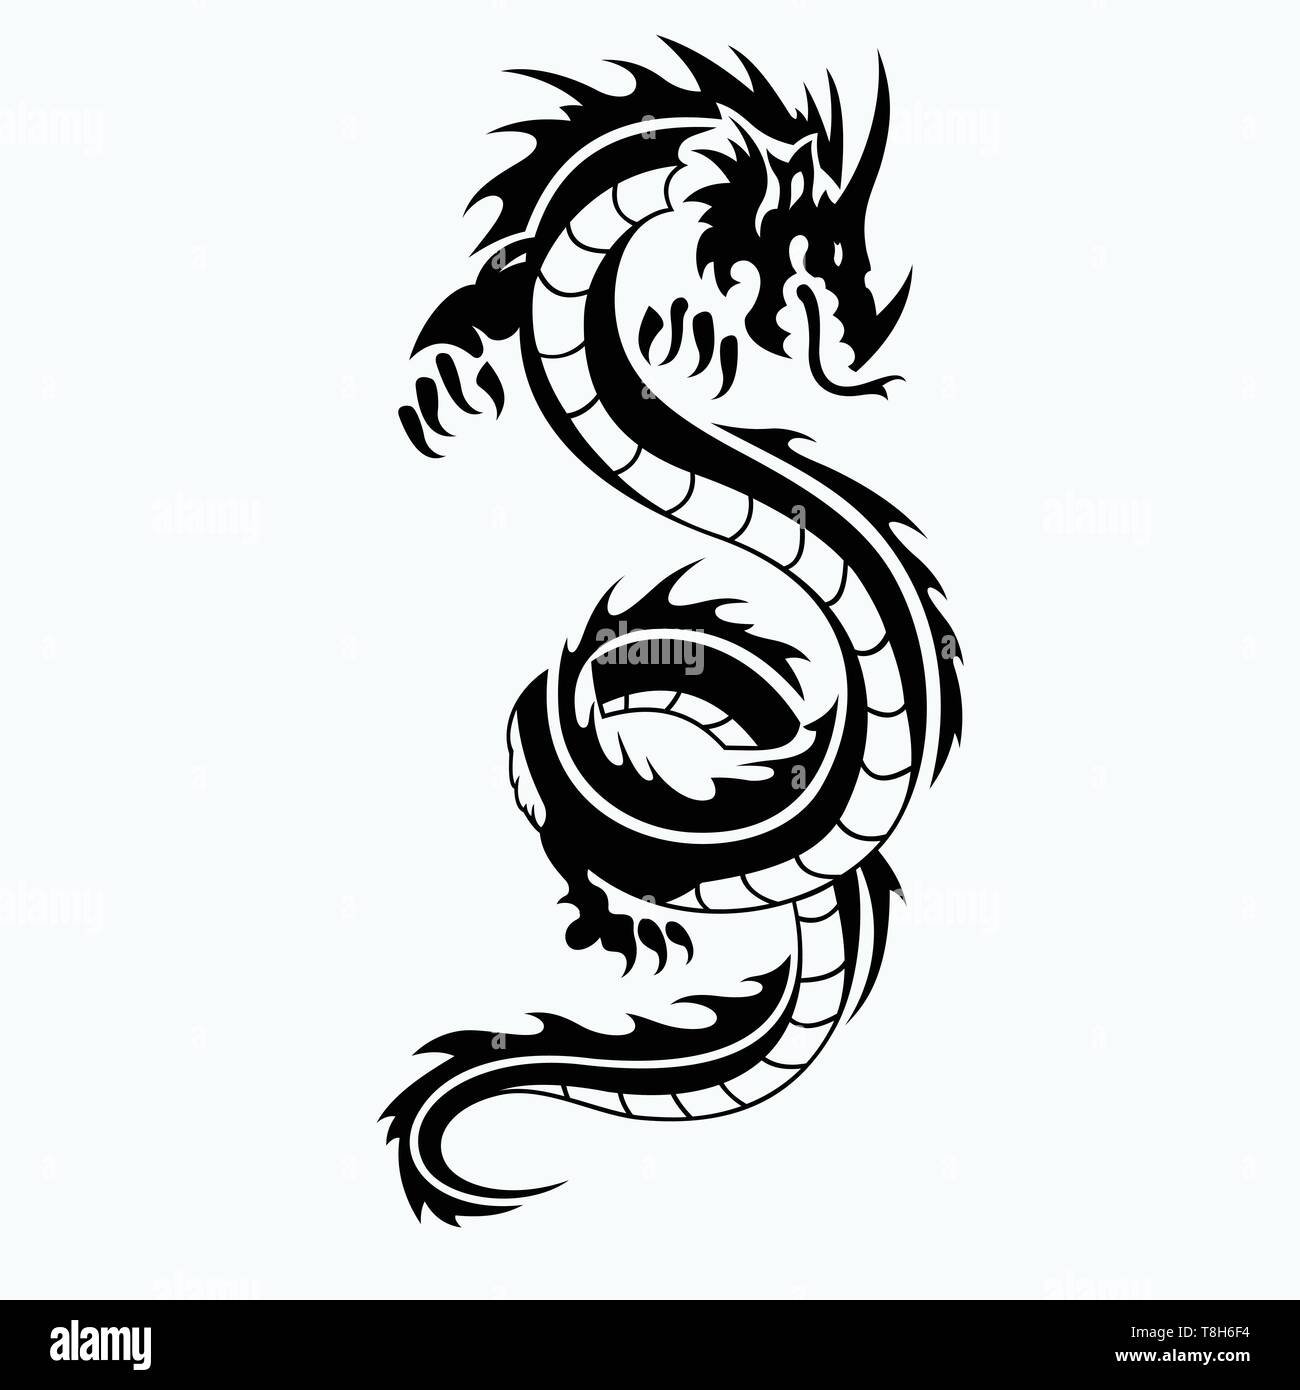 Chinese Dragon Tattoo Designs Banque D Image Et Photos Alamy